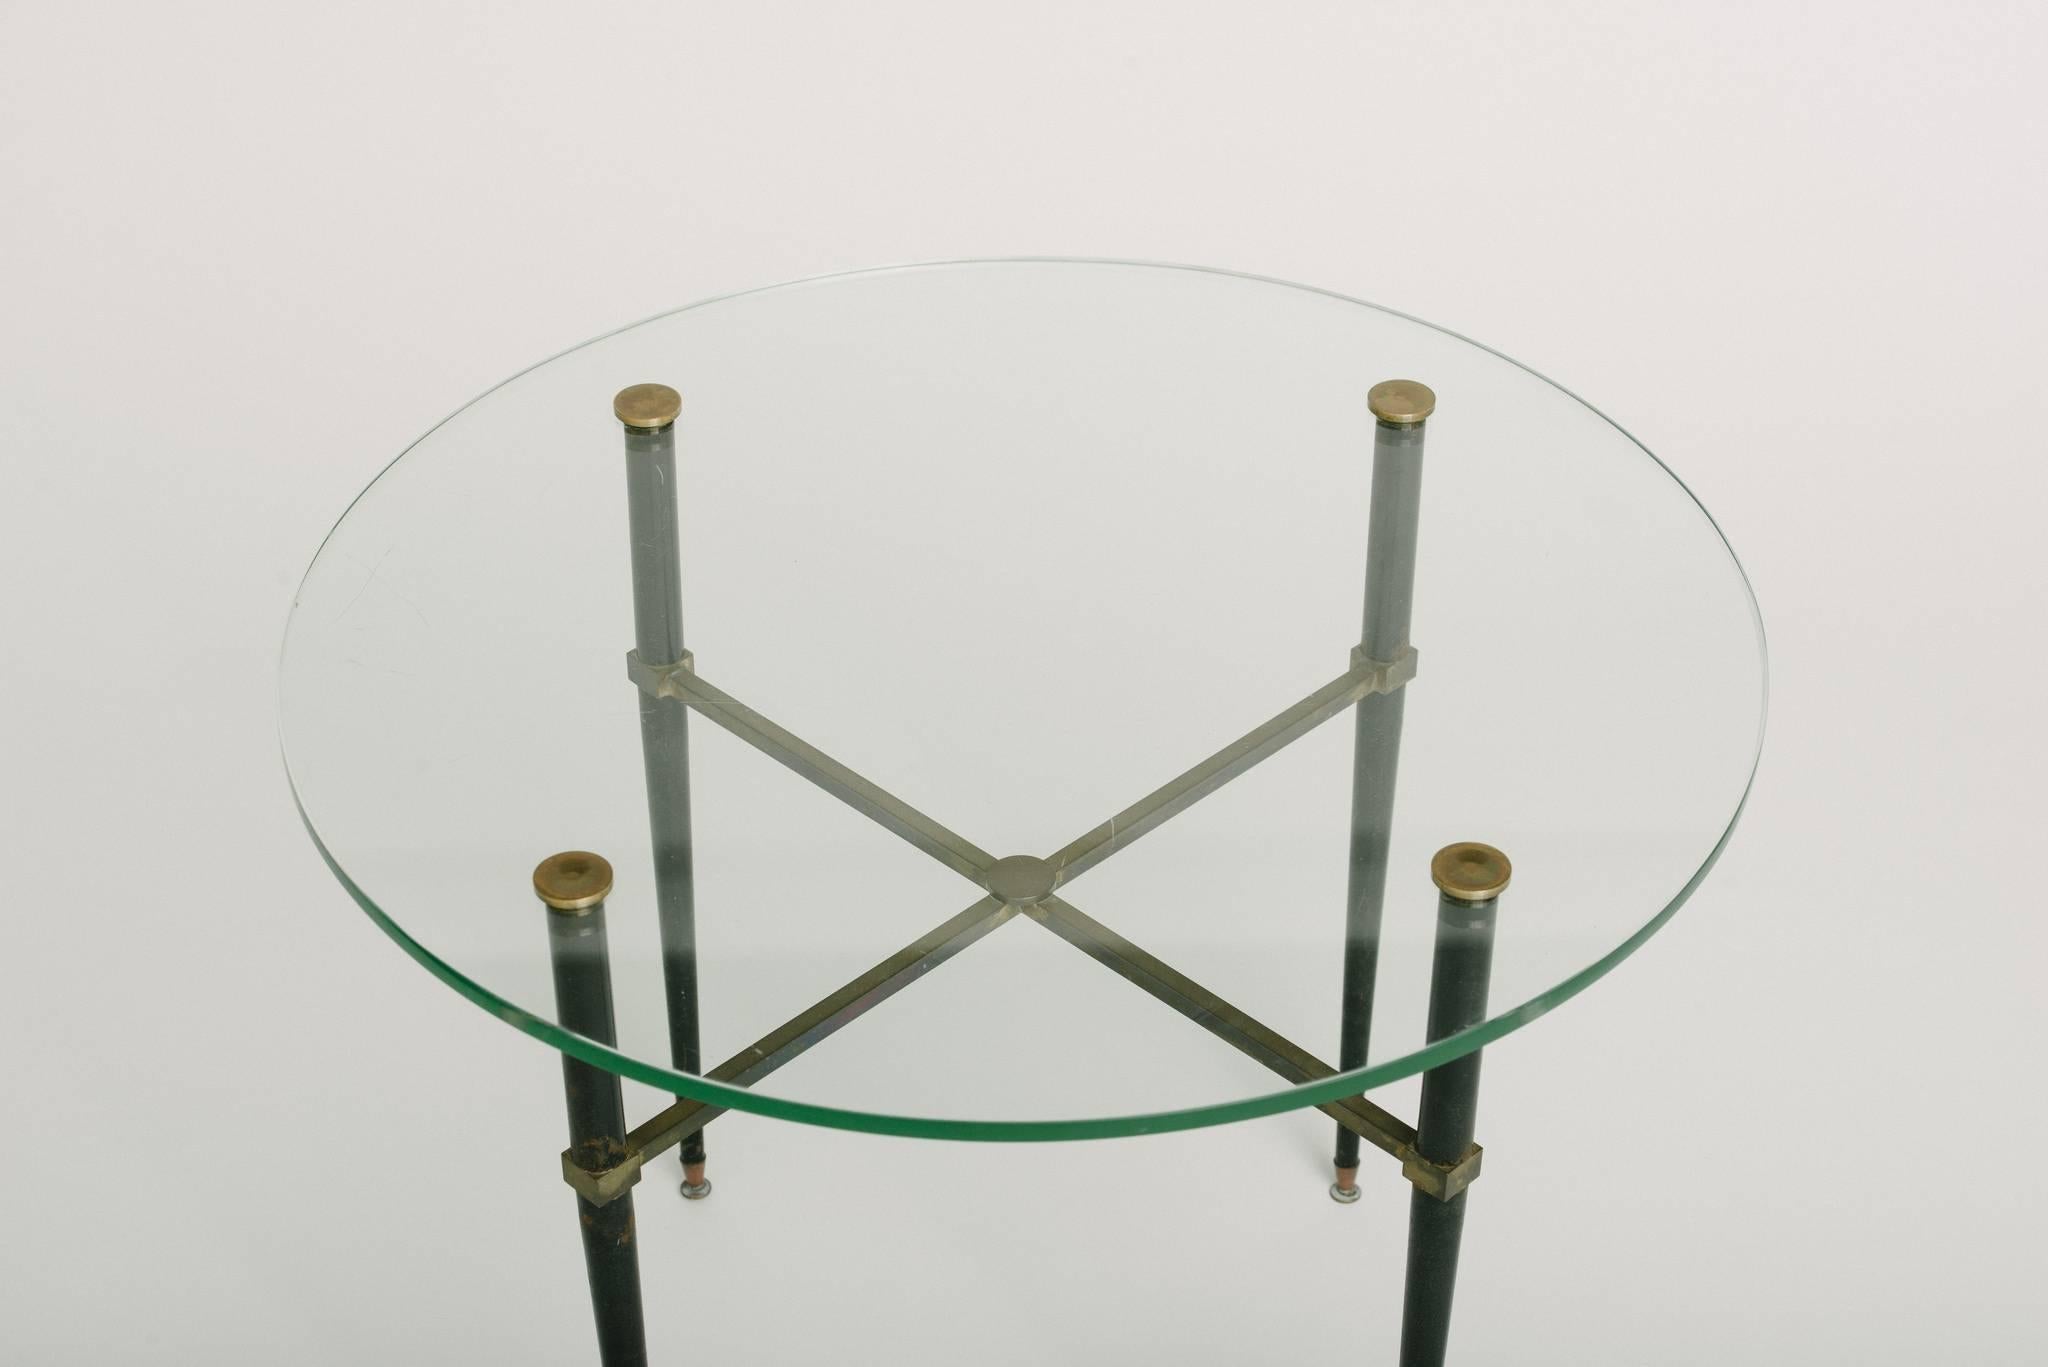 A 1940s stylized Italian round bronze table, patinated black legs, and glass top.